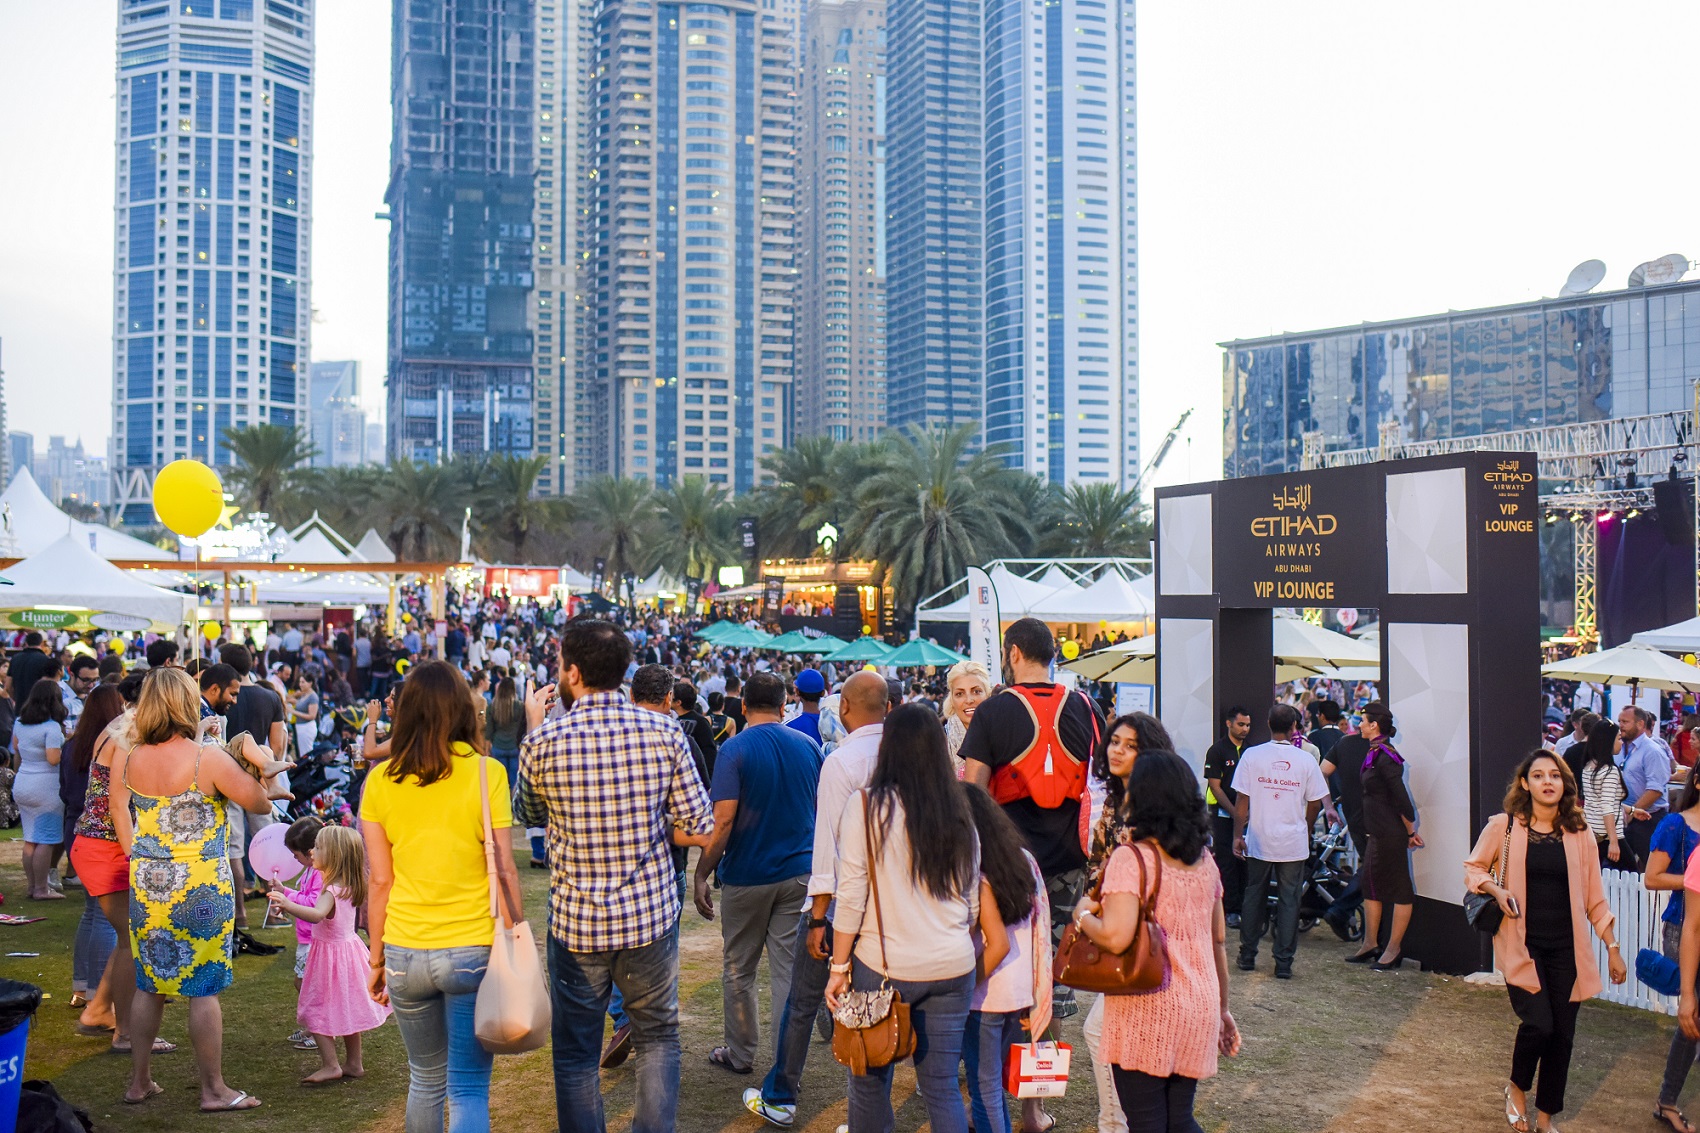 THE COUNTDOWN IS ON FOR TASTE OF DUBAI 2017